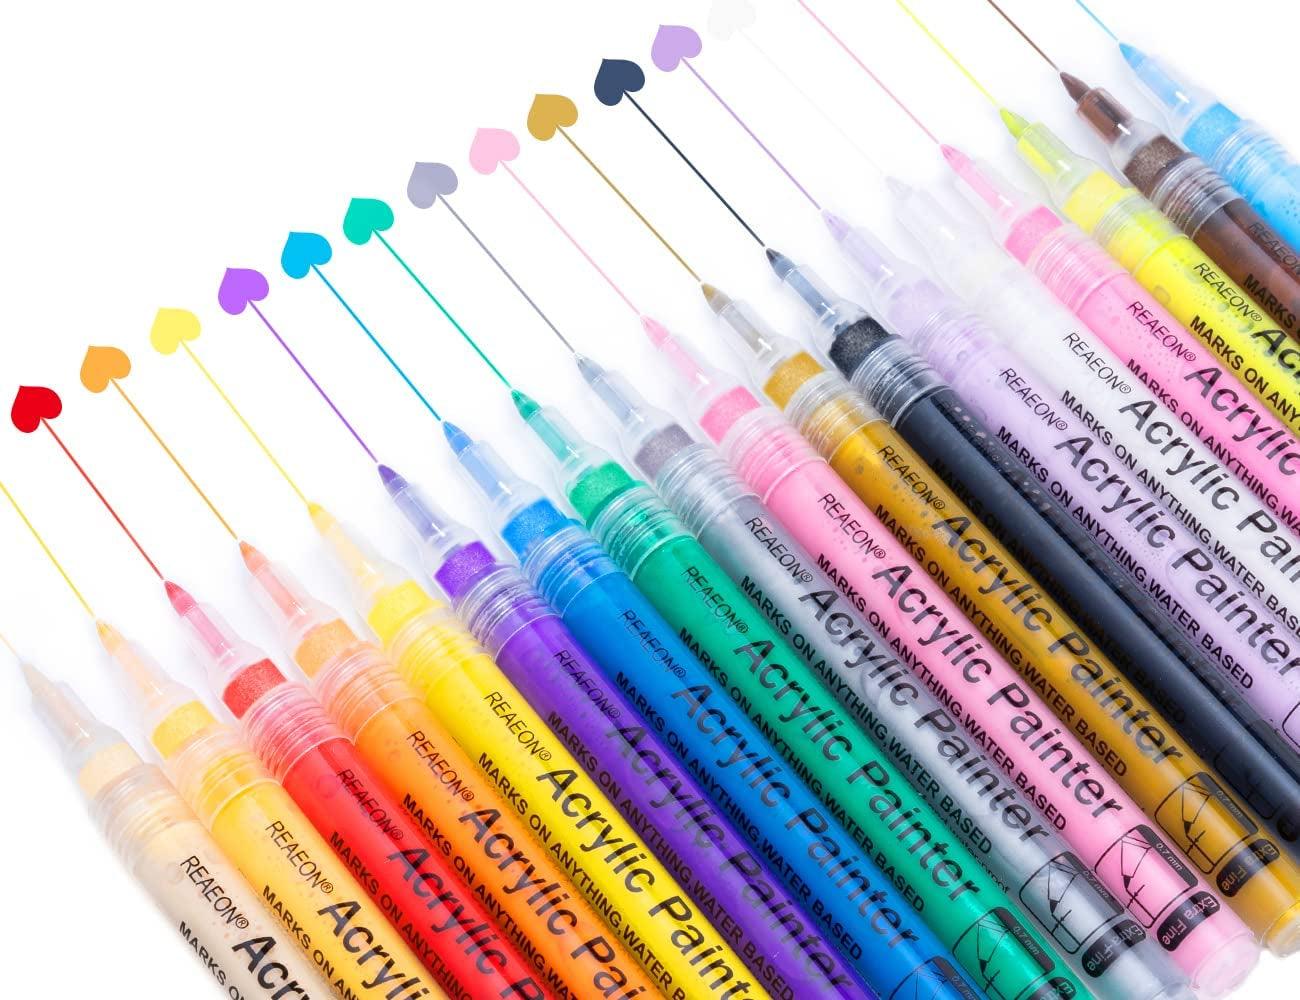 18 Colors Acrylic Paint Marker Pens for Rock Painting Fine Point